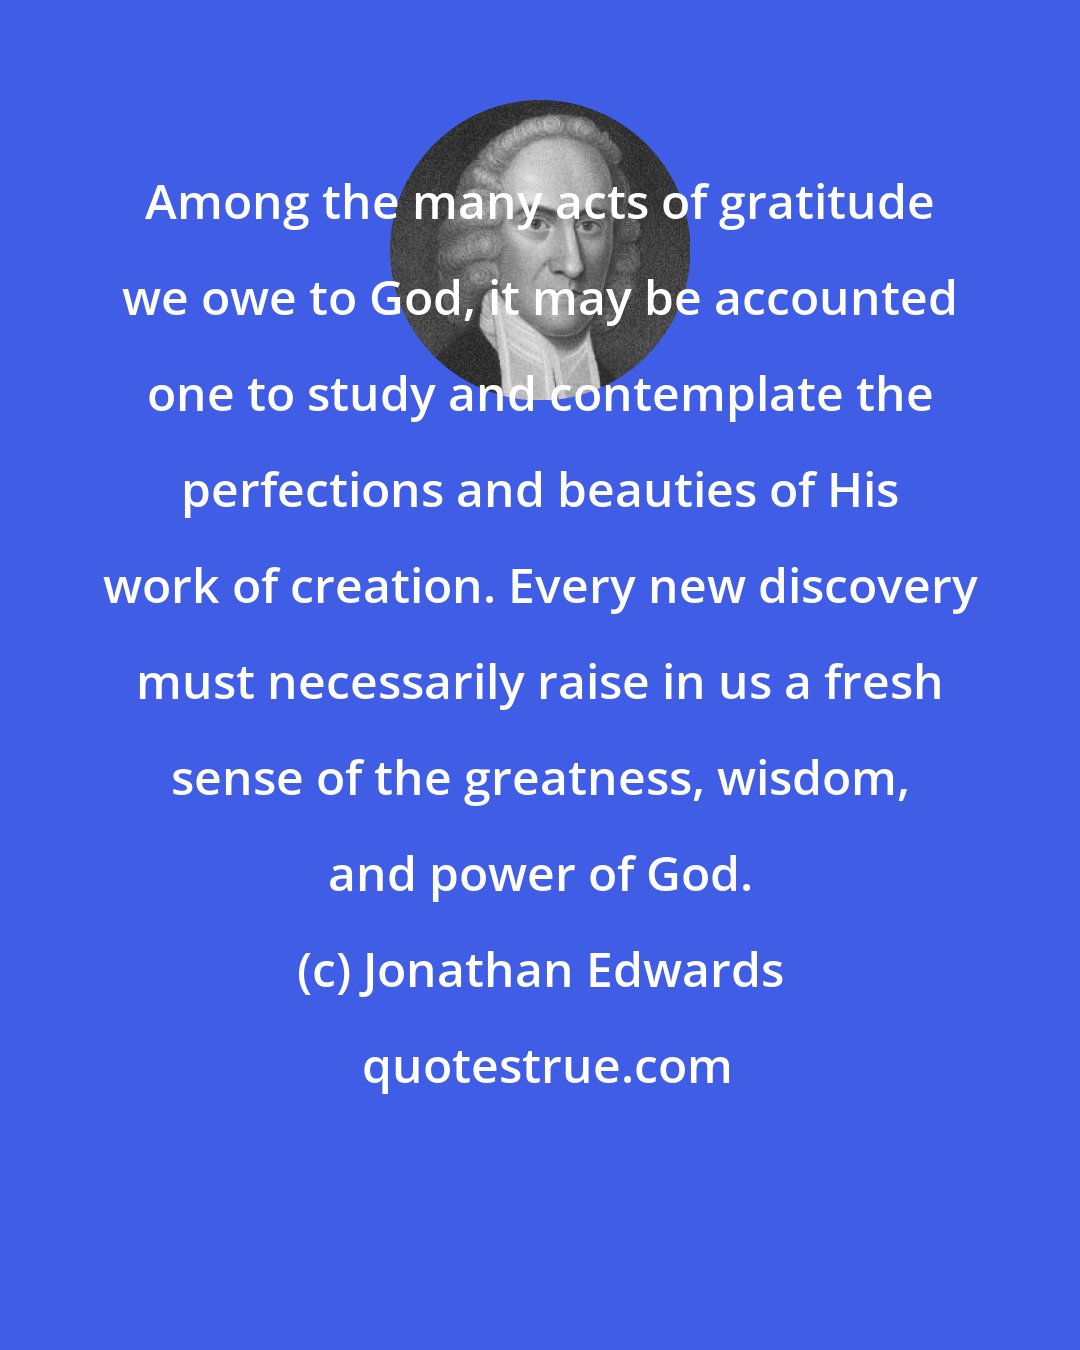 Jonathan Edwards: Among the many acts of gratitude we owe to God, it may be accounted one to study and contemplate the perfections and beauties of His work of creation. Every new discovery must necessarily raise in us a fresh sense of the greatness, wisdom, and power of God.